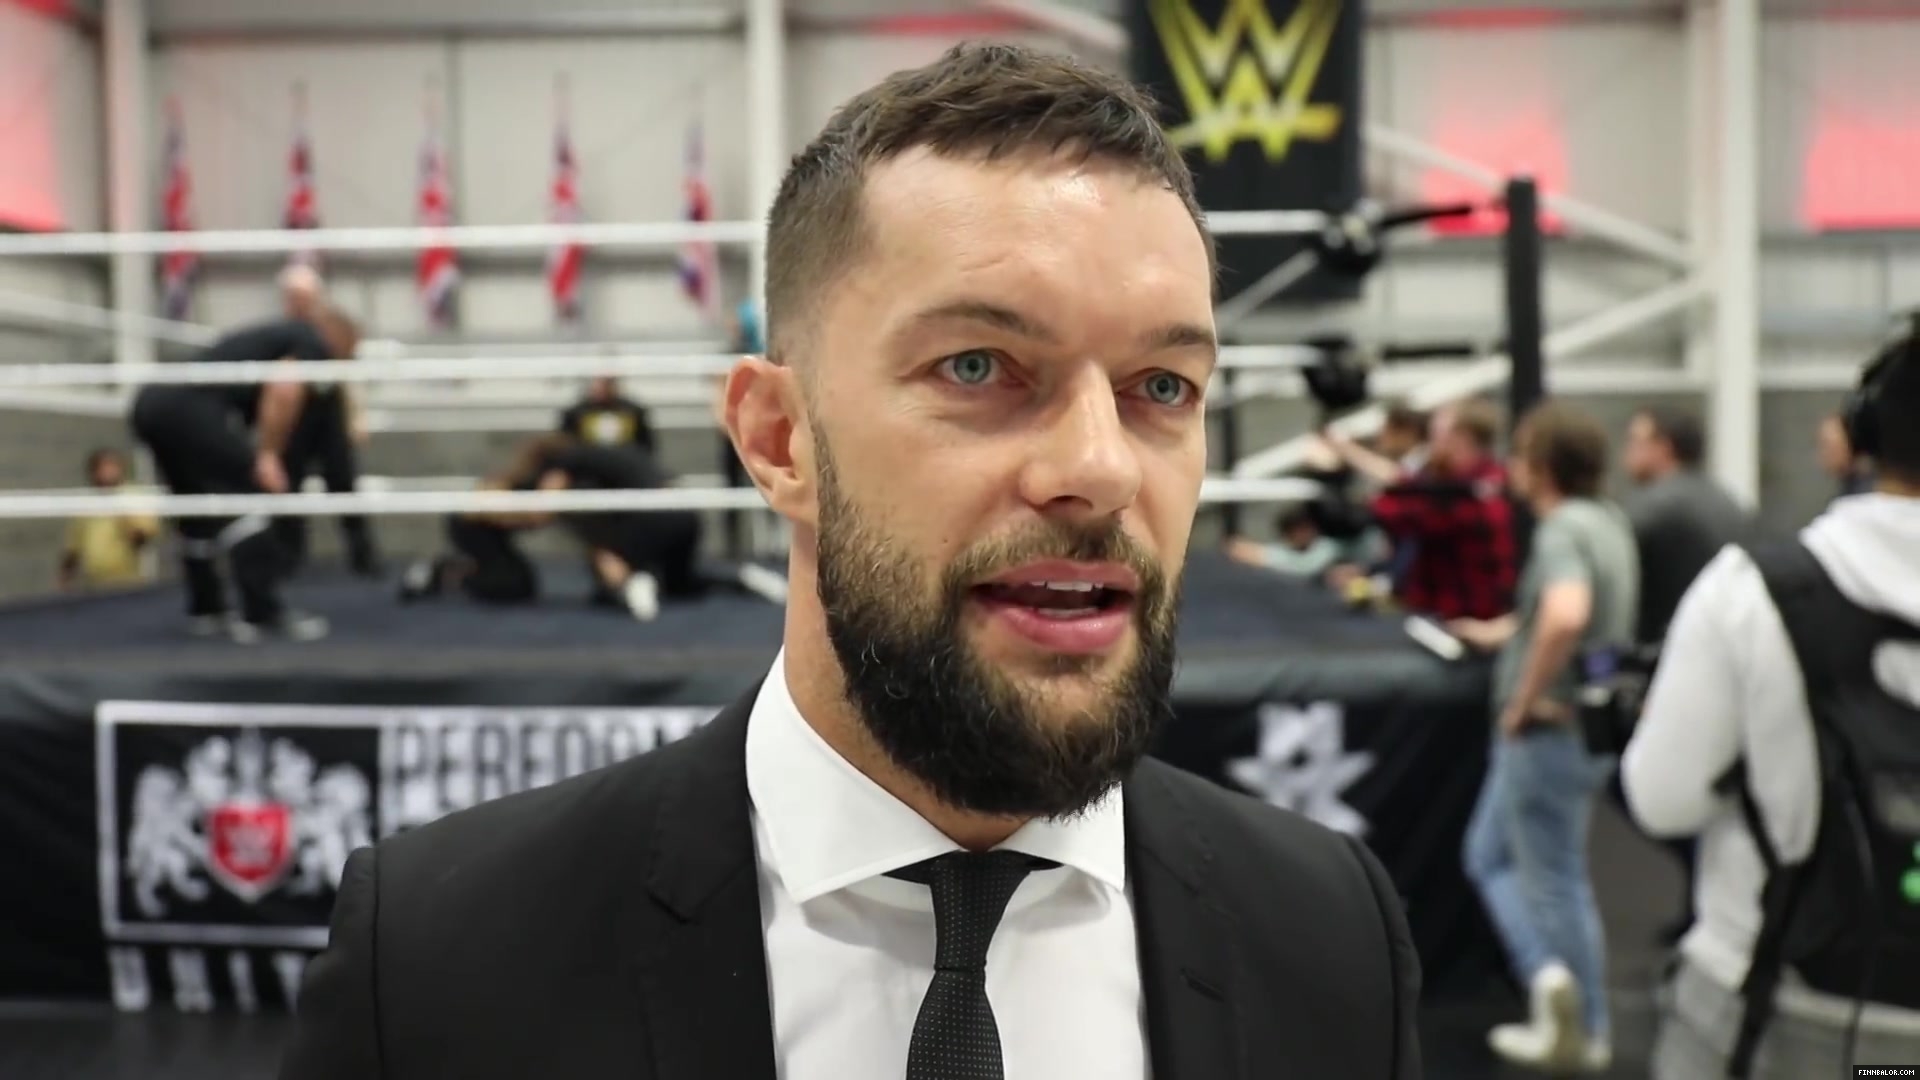 WWE_Superstar_FINN_BALOR_joins_MOUSTACHE_MOUNTAIN_at_the_opening_of_the_NXT_UK_PC_139.jpg